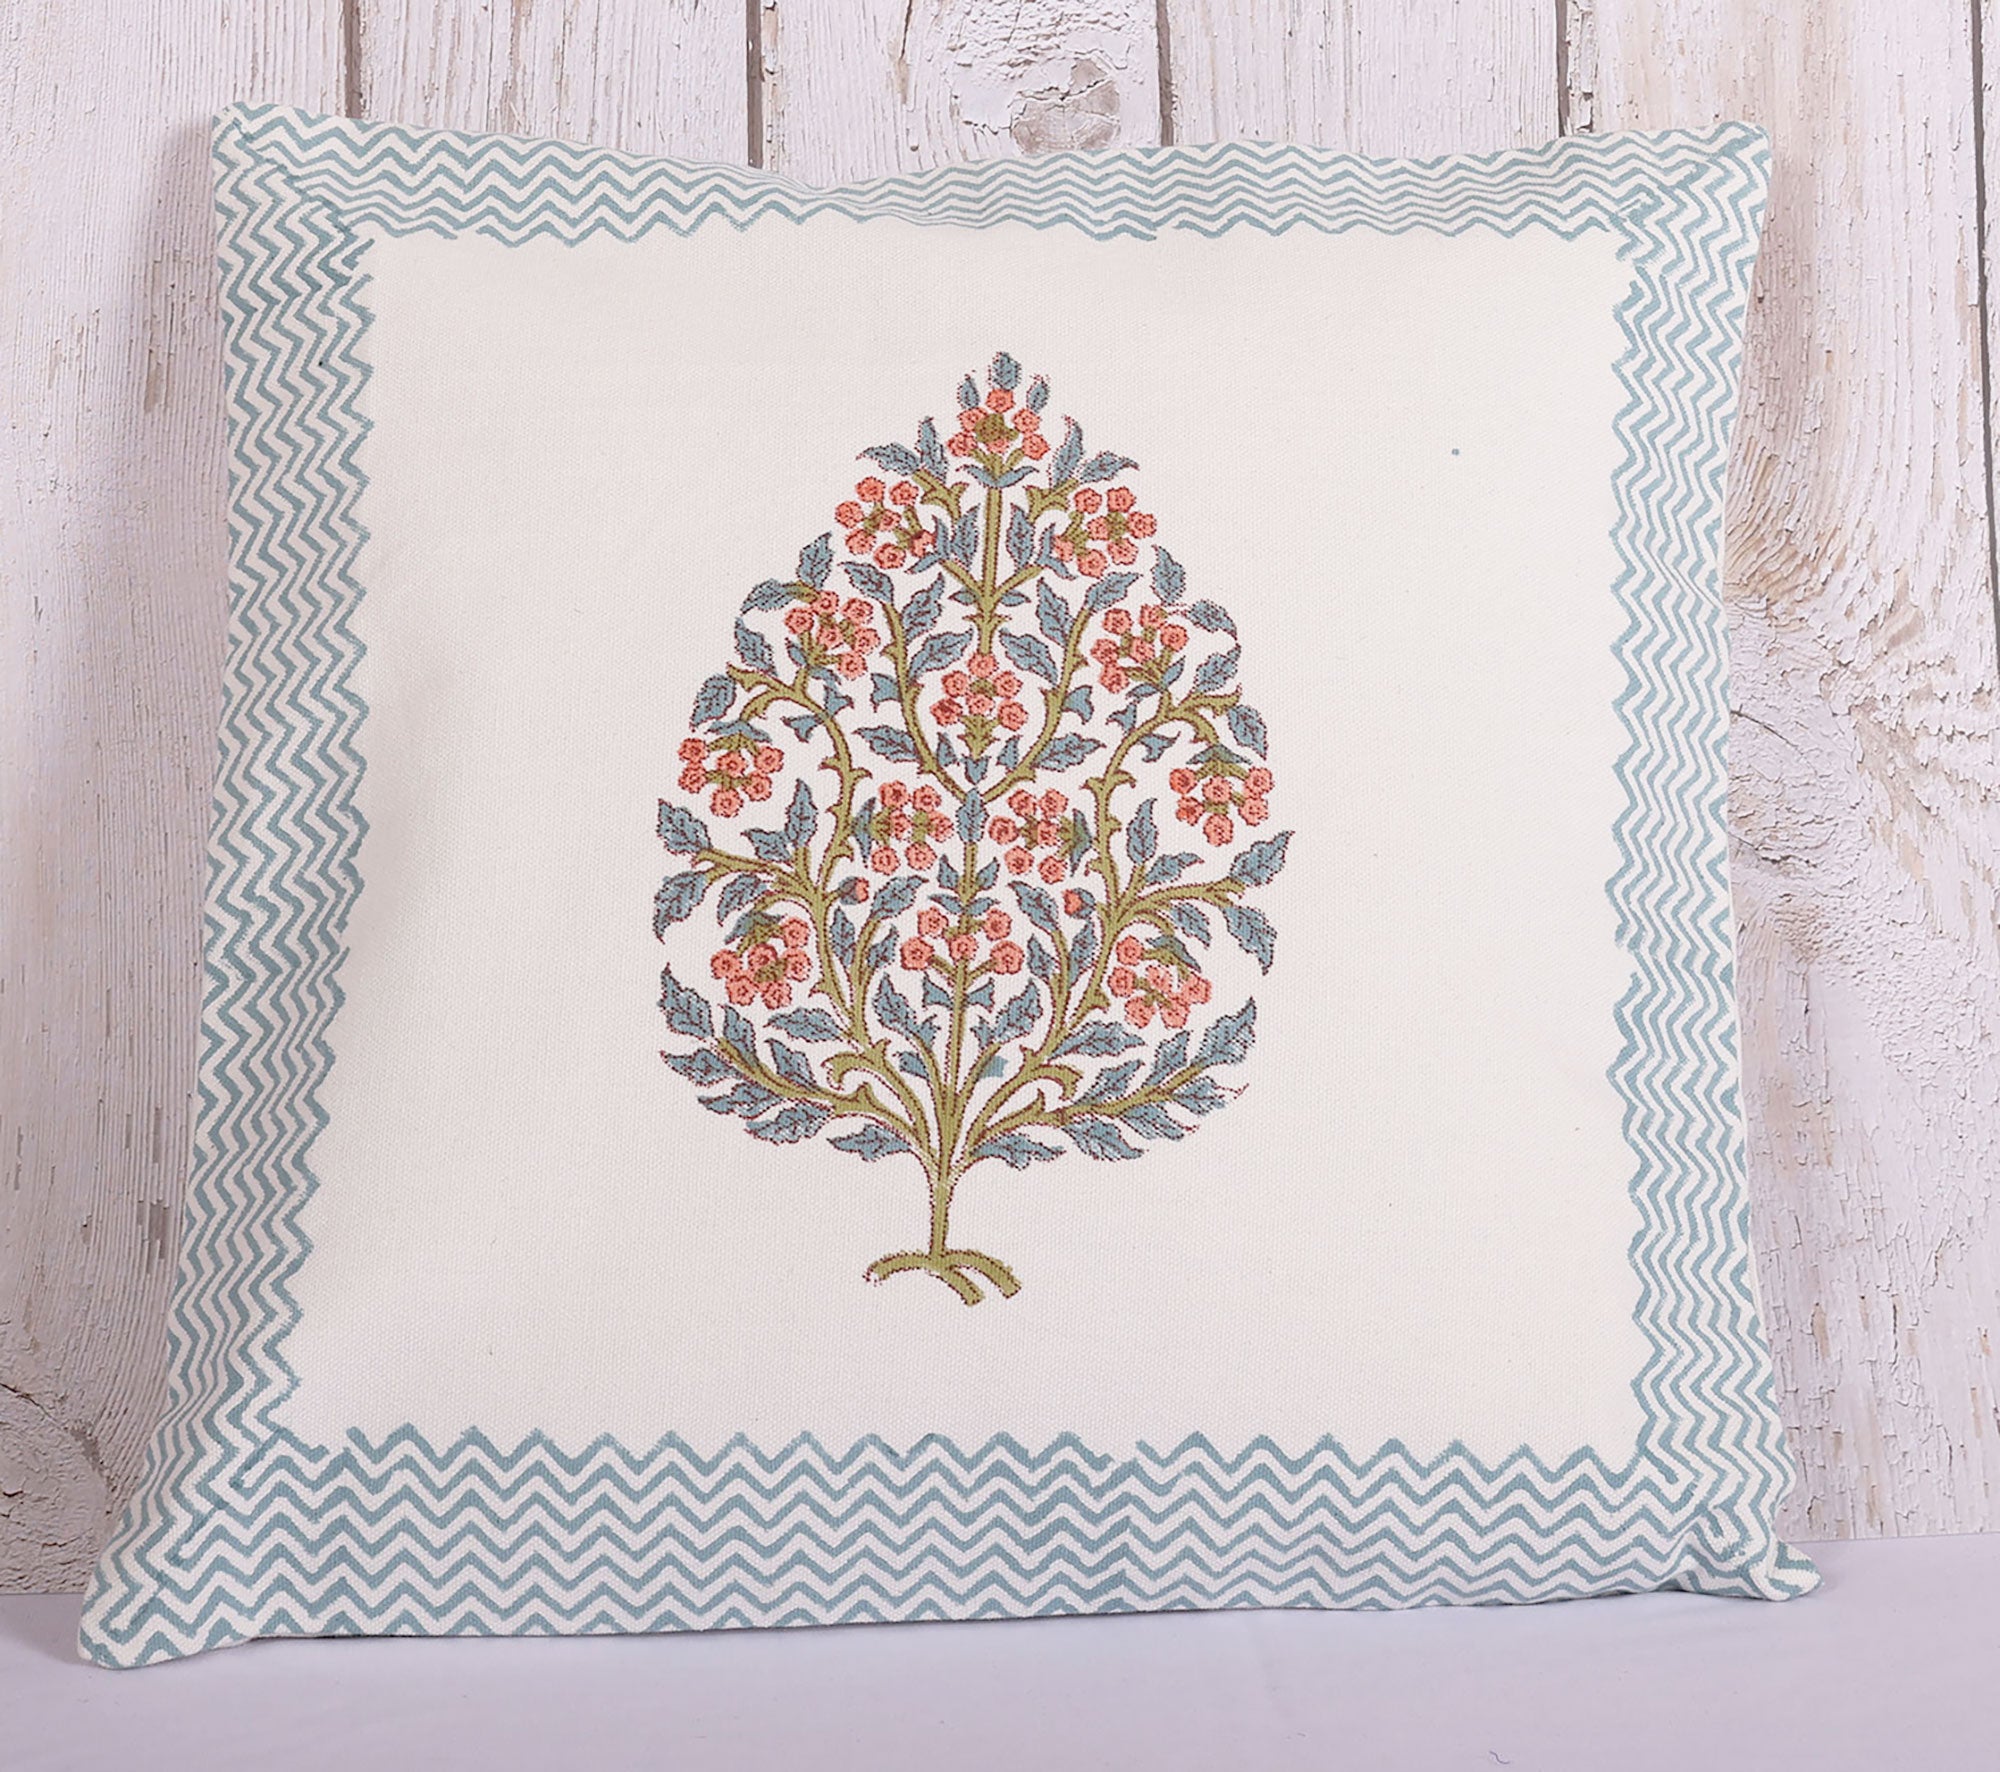 White & Blue Sweet Canvas Block Printed 100 % Cotton Cushion Cover - 16x16 inches